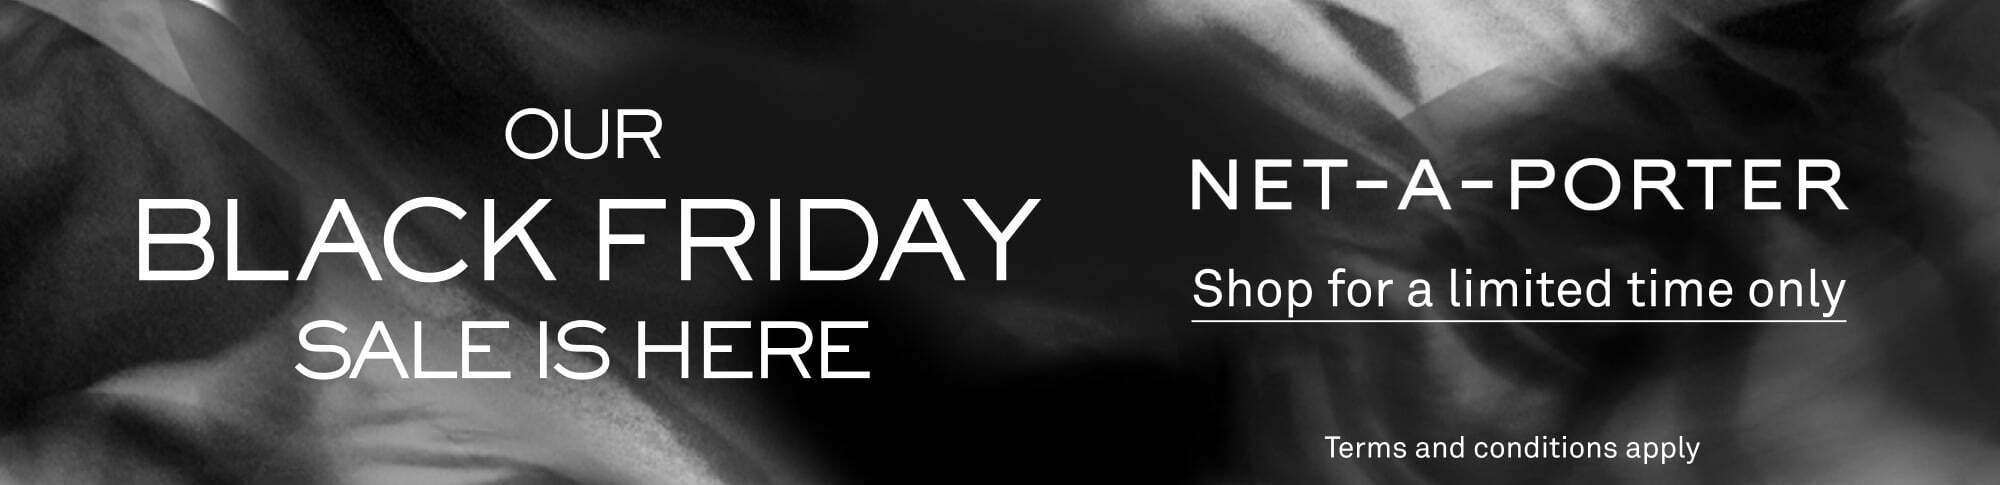 Black Friday at Net-a-Porter: 30% off selected